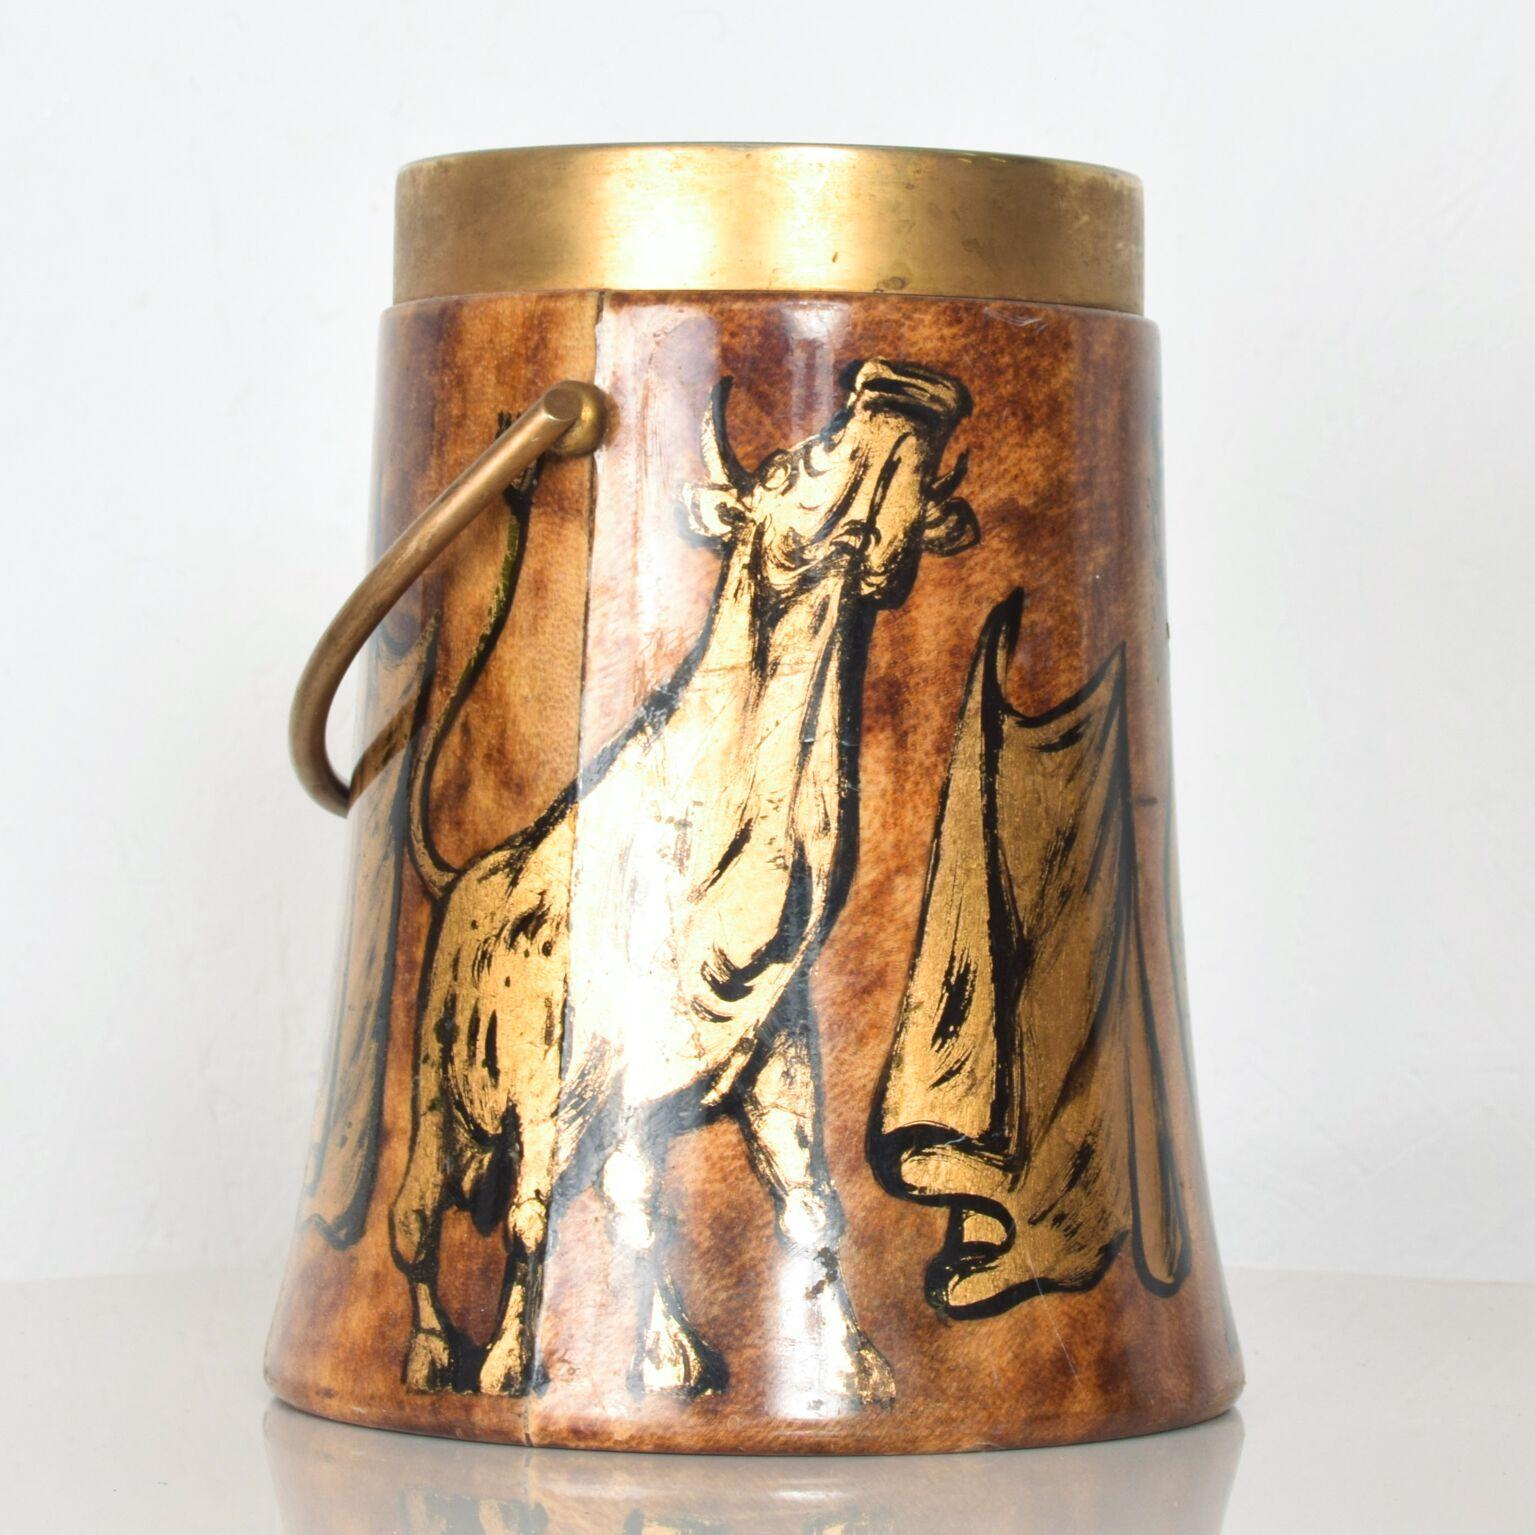 Rare ice bucket by Aldo Tura Macabo Cusano. Beautiful hand painted art, circa 1950s. ITALY
Fancy Gold Italian Stallion Bull Design. Made in Brass, leather and blown glass. 
Dimensions: 10